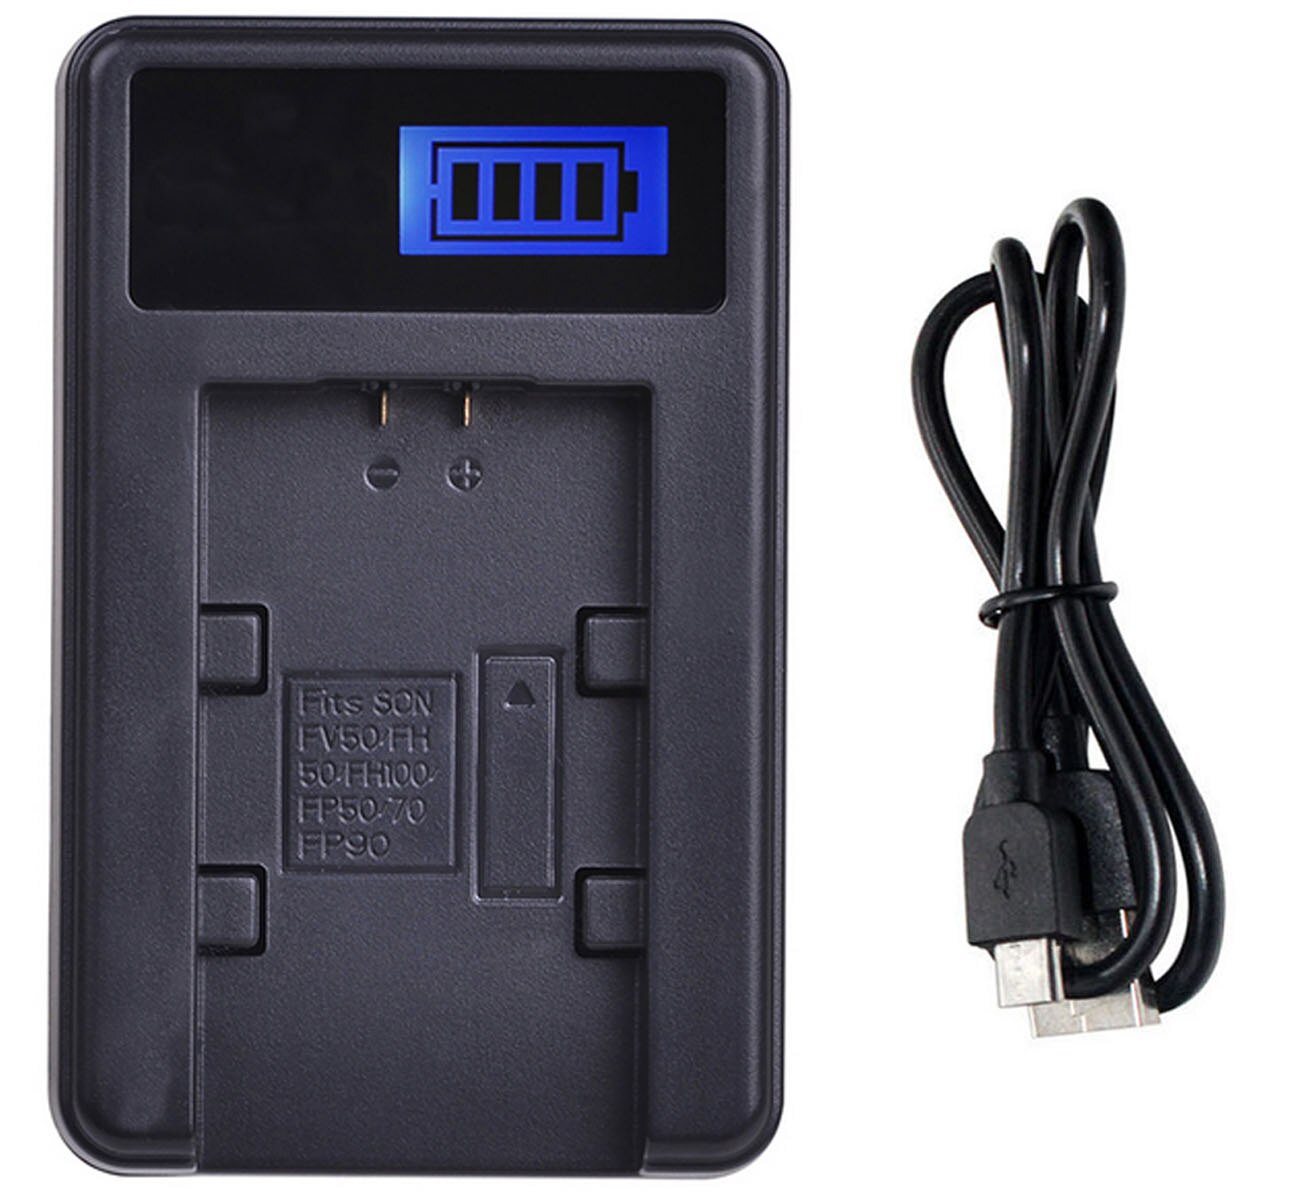 Lcd Usb Batterij Lader Voor Sony NP-FH30, NP-FH40, NP-FH50, NP-FH60, NP-FH70, NP-FH100 Infolithium H Serie: 1x LCD USB Charger